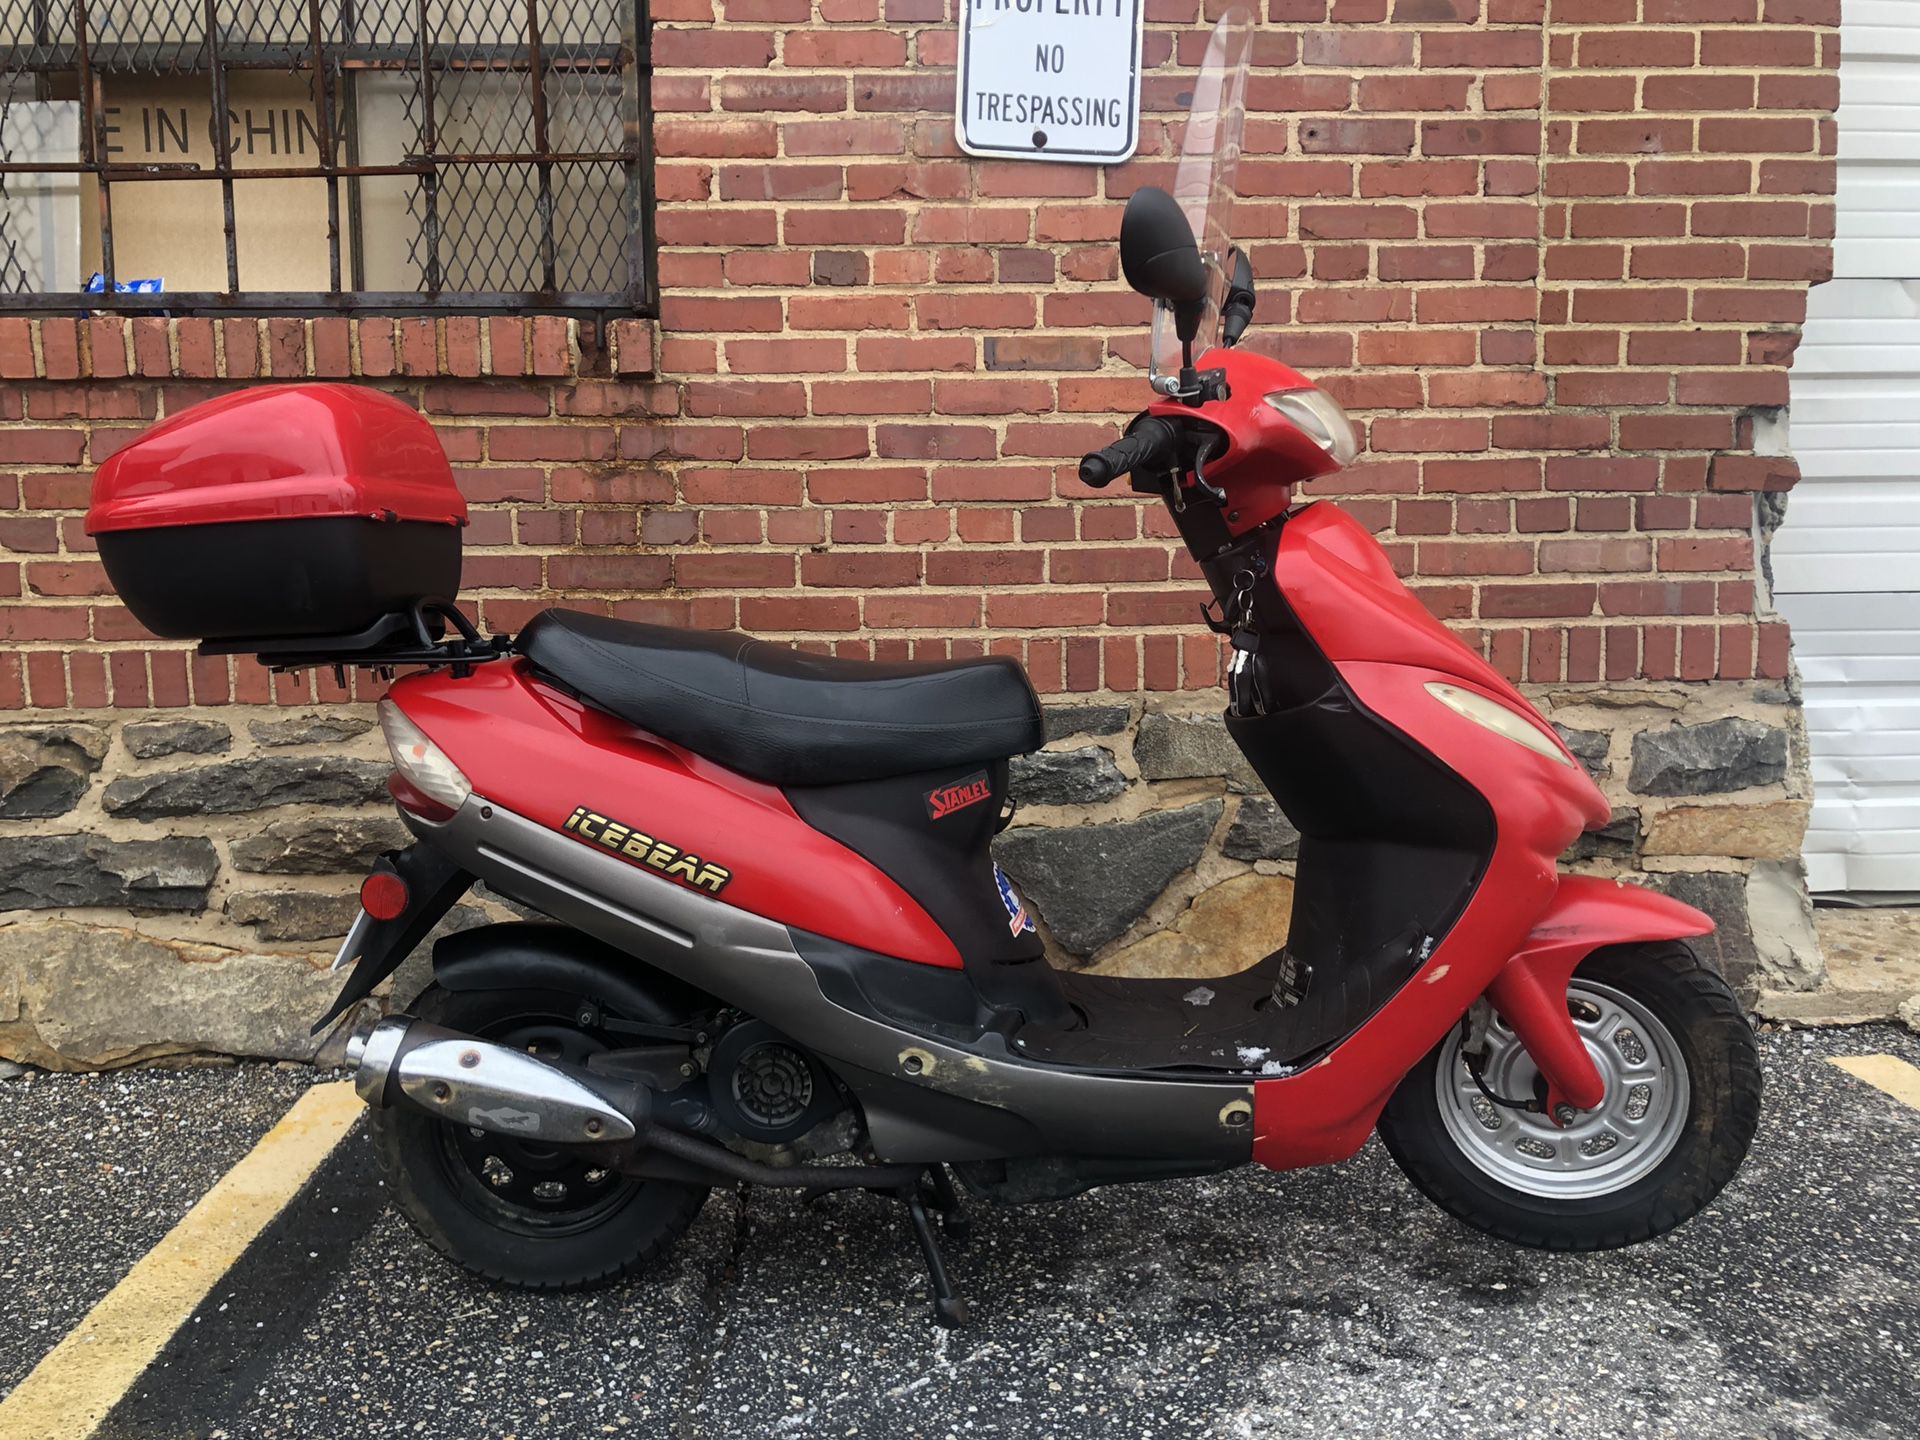 50cc scooter with 80cc engine upgrade